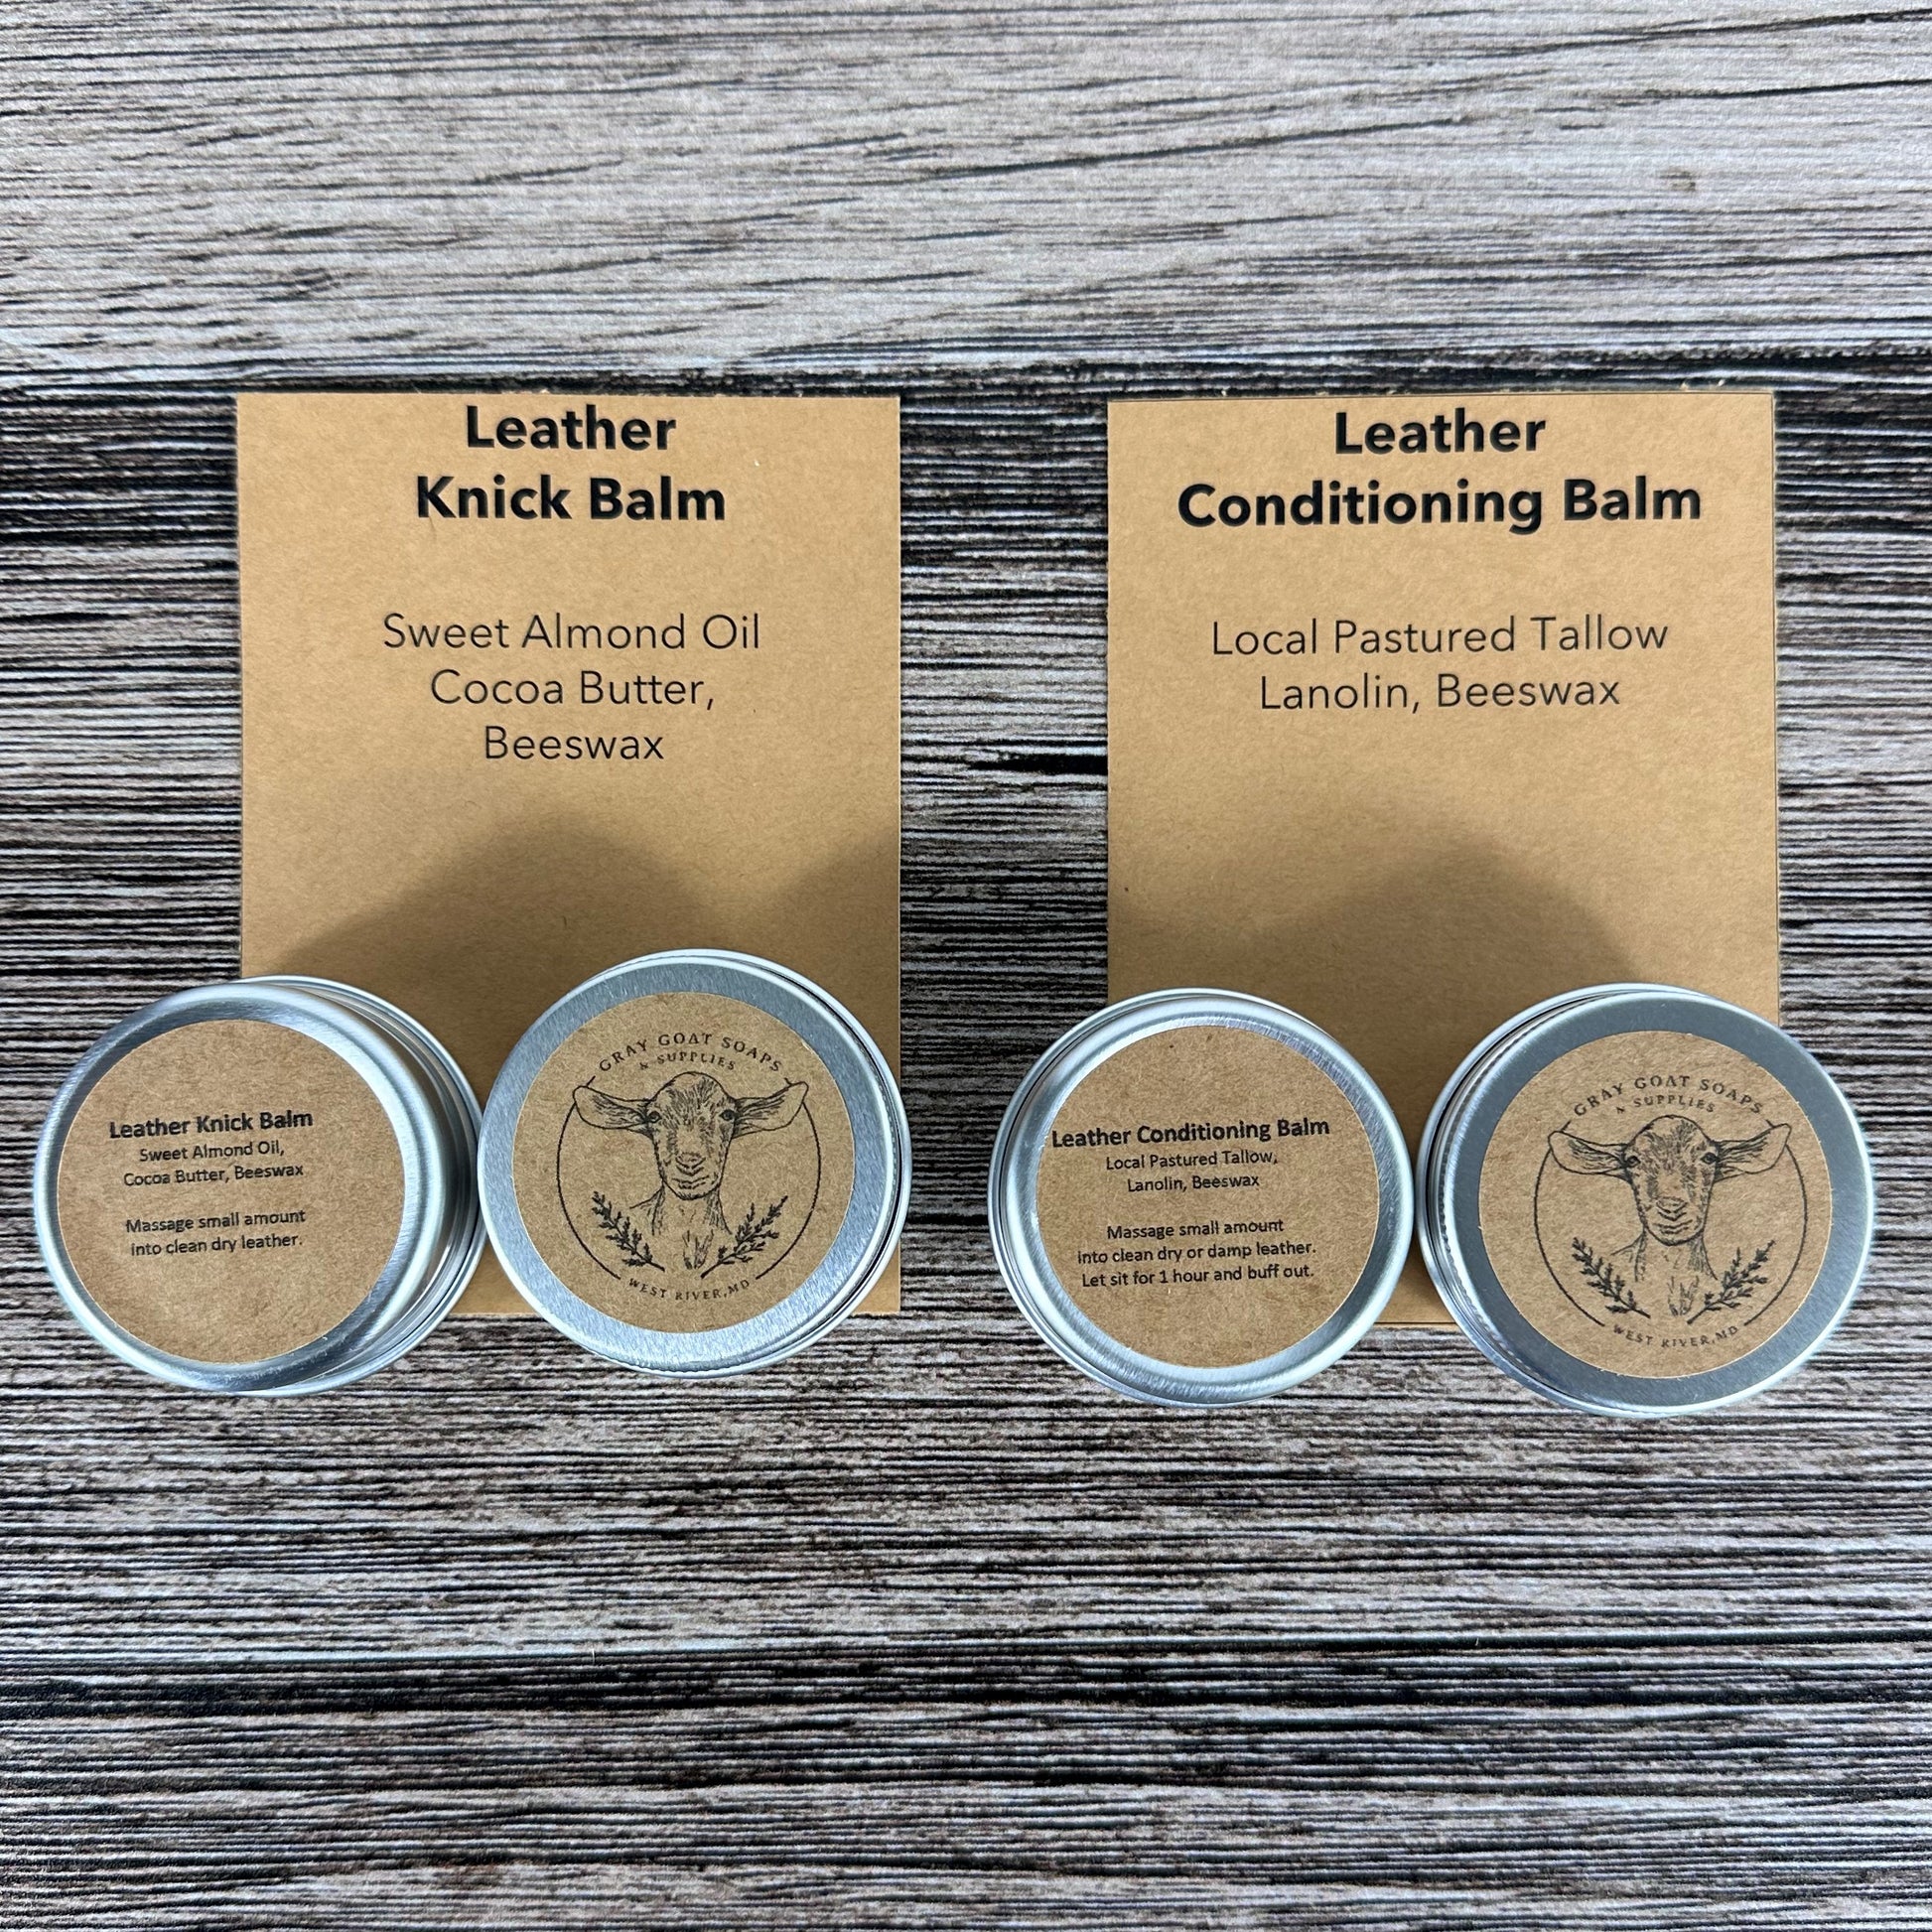 Conditioning and Knick Balm squirescanvascreations.com